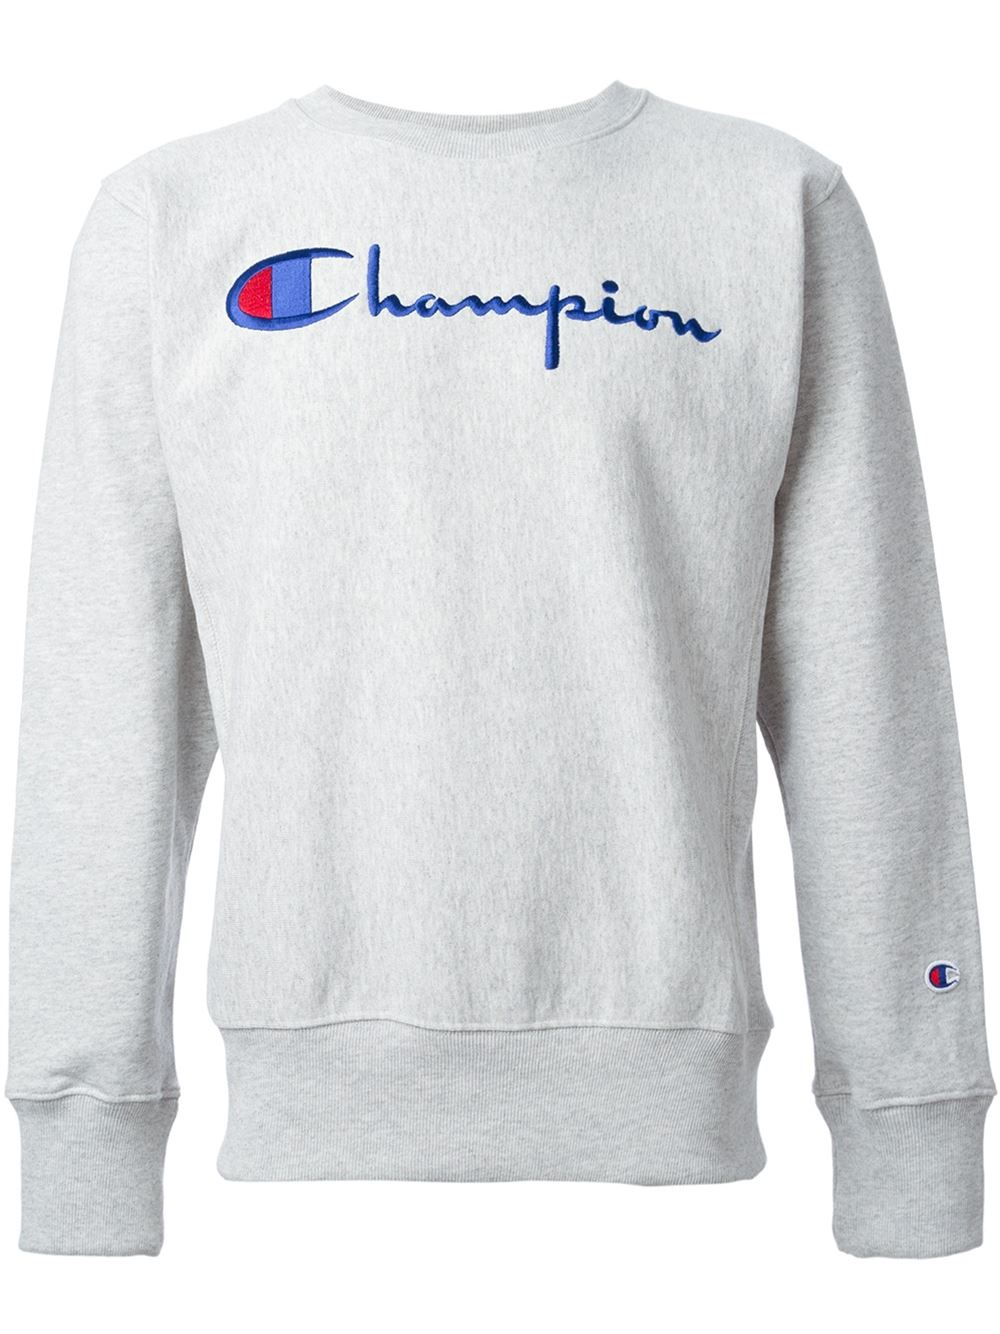 Lyst - Champion Logo Embroidered Sweatshirt in Gray for Men